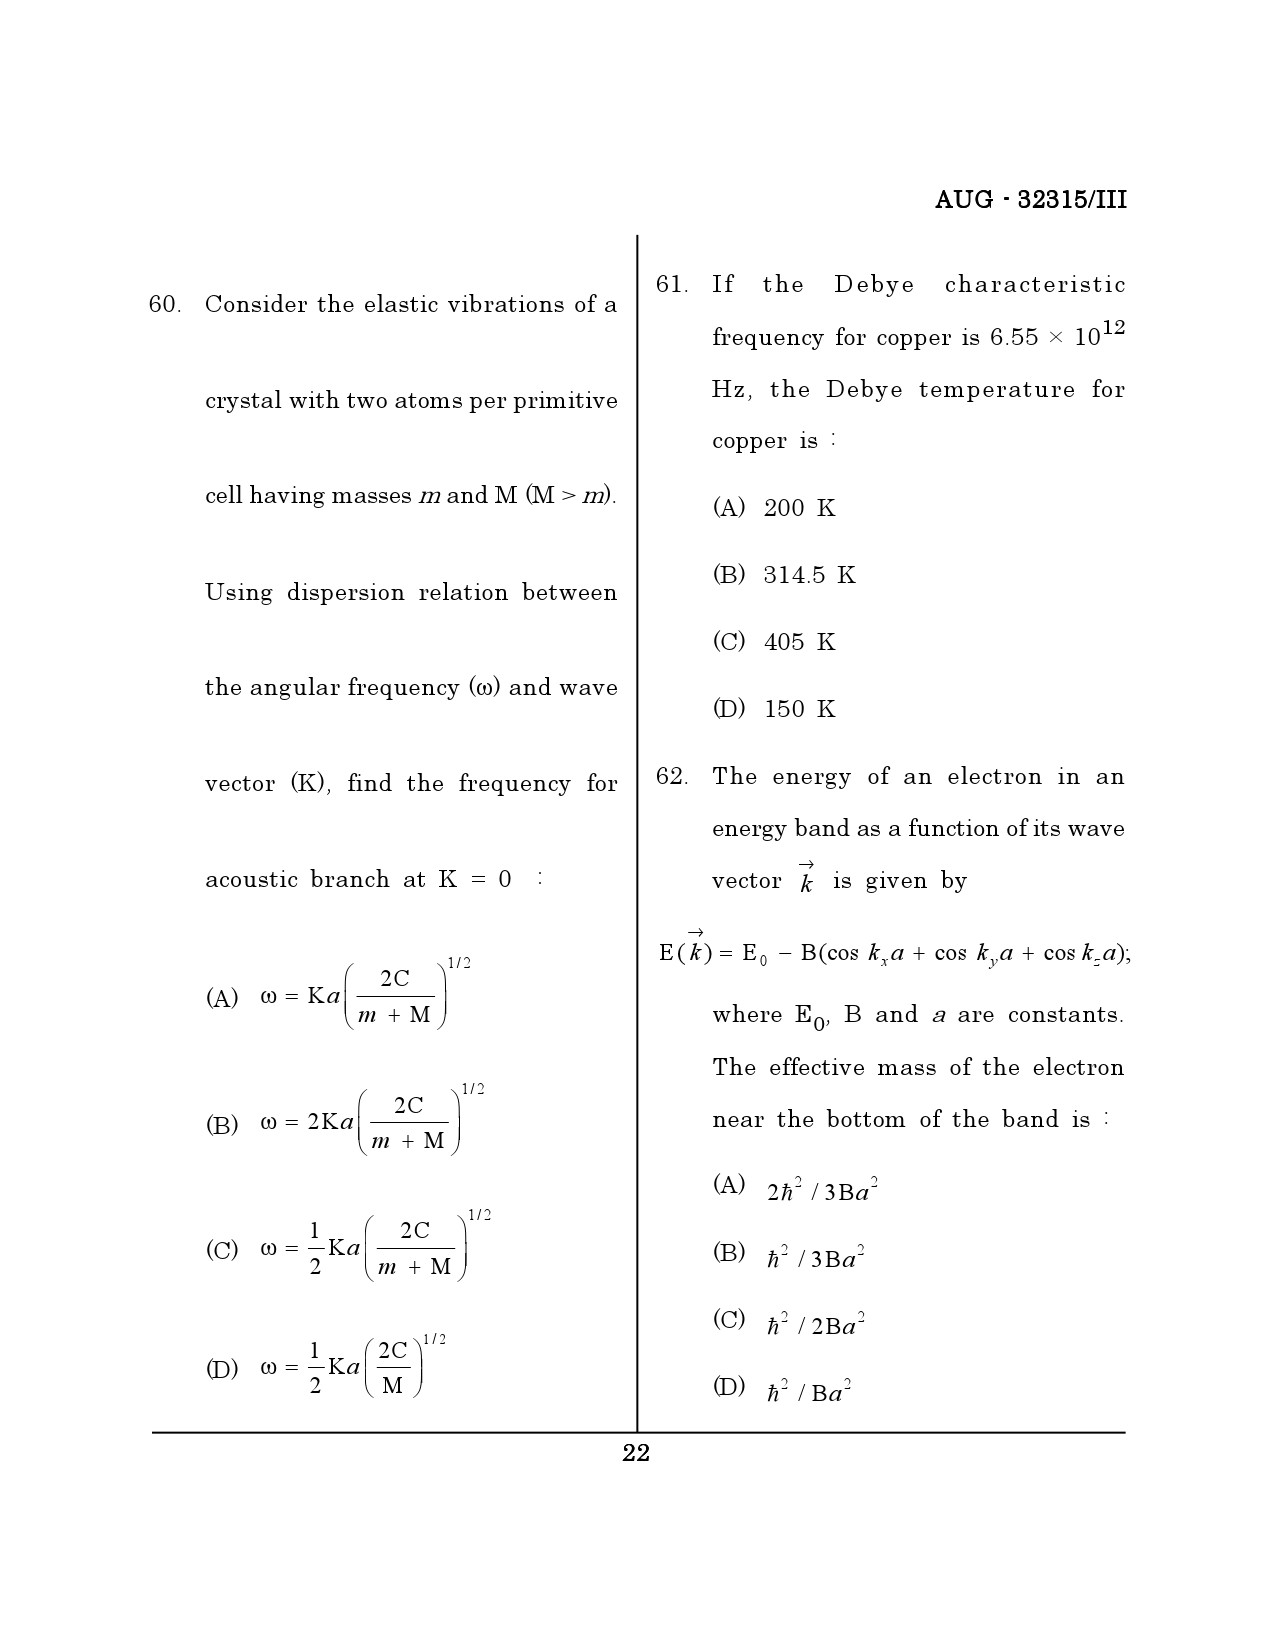 Maharashtra SET Physical Science Question Paper III August 2015 21